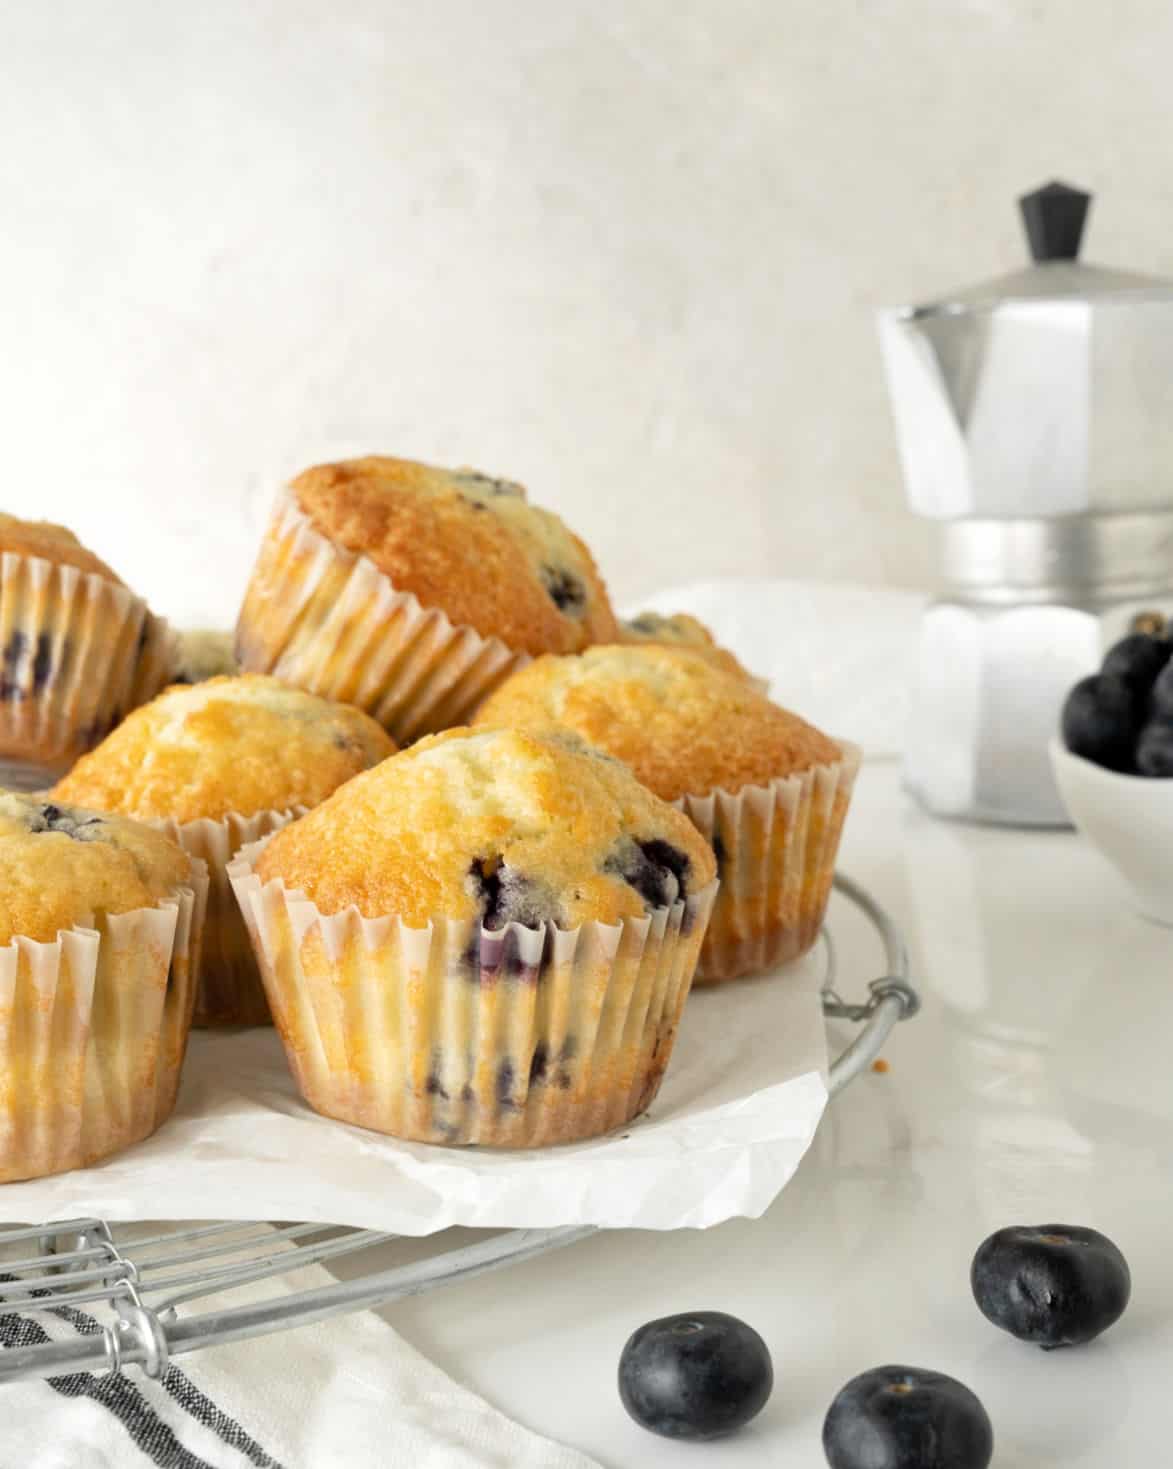 Grey background, white marble surface with pile of blueberry muffins on a wire rack with a white paper. Metal coffee pot, loose blueberries. 